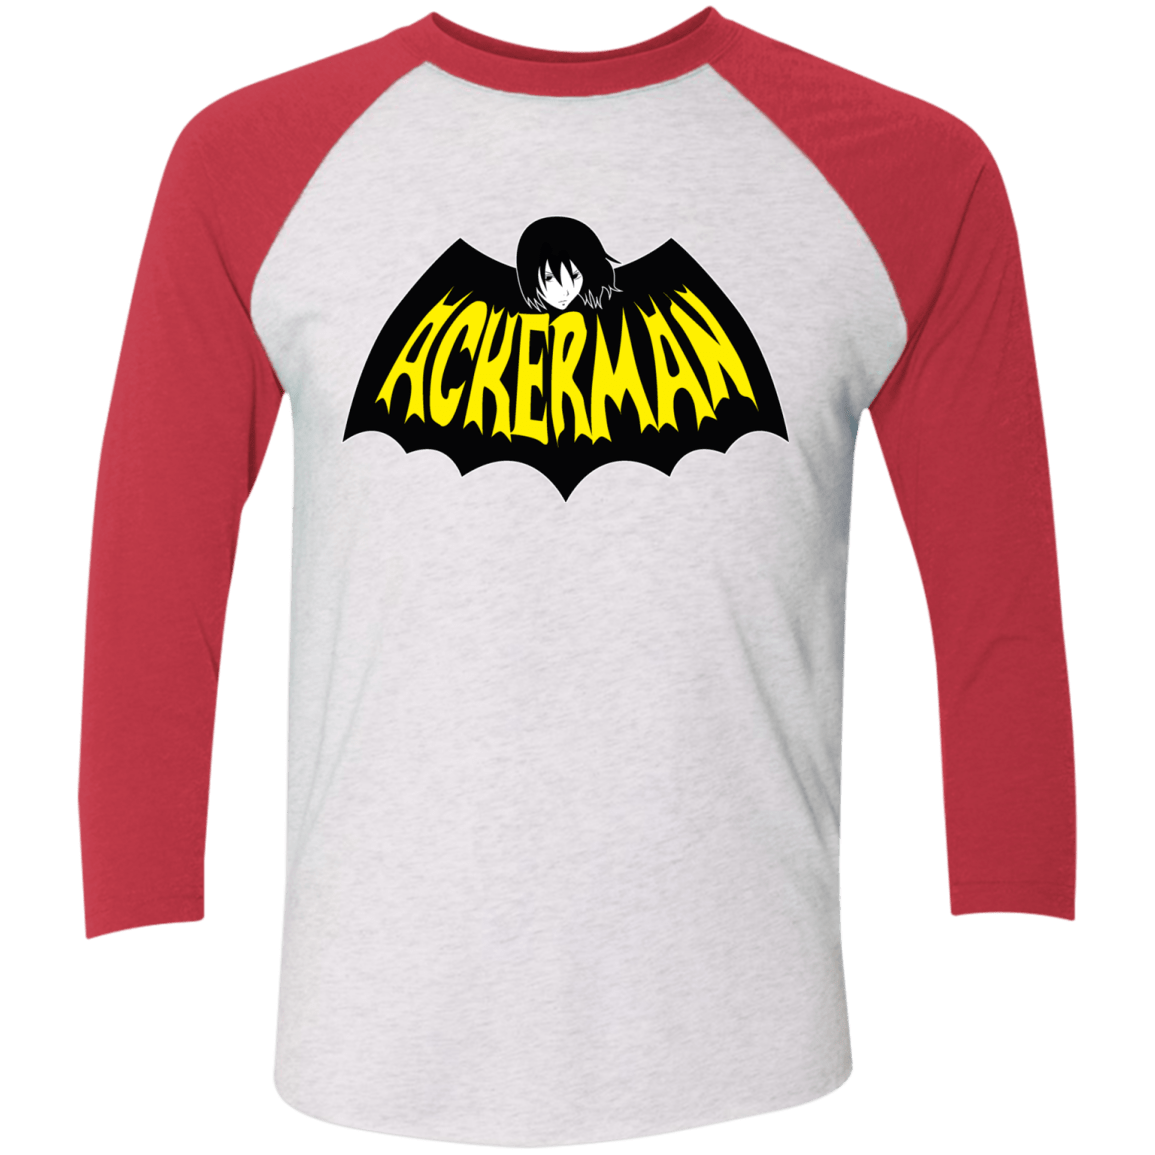 T-Shirts Heather White/Vintage Red / X-Small Ackerman Men's Triblend 3/4 Sleeve